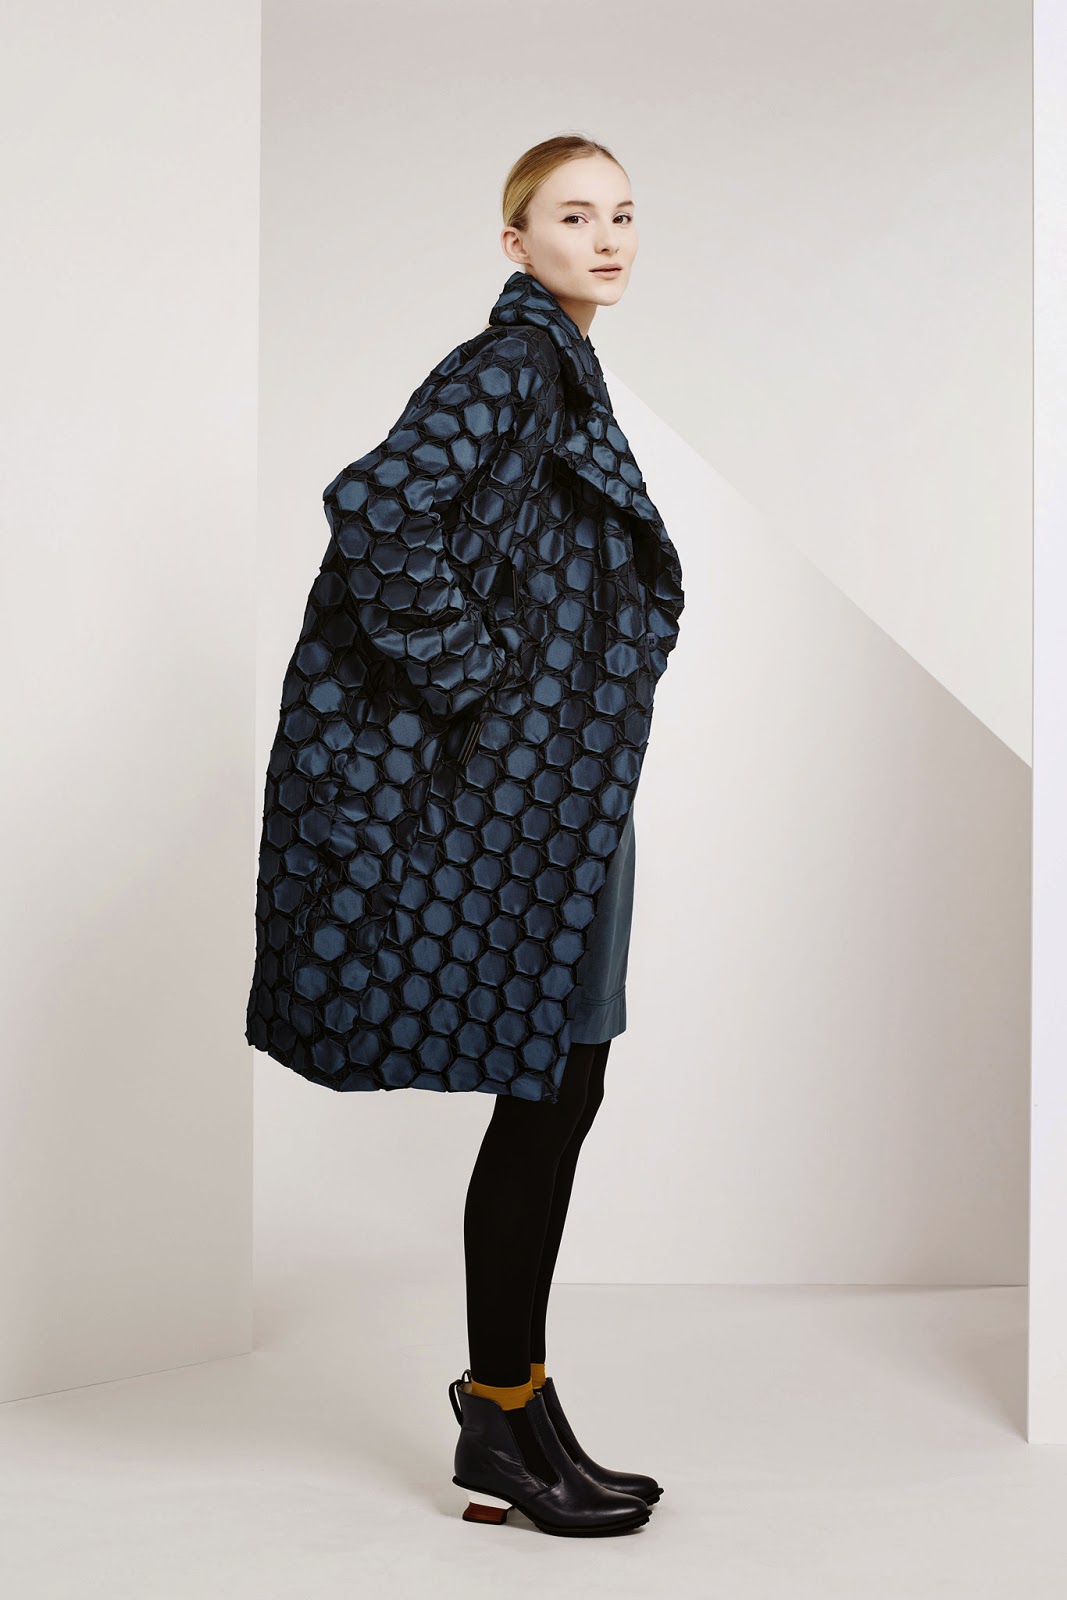 Serendipitylands: ISSEY MIYAKE COLLECTION PRE-FALL 2015